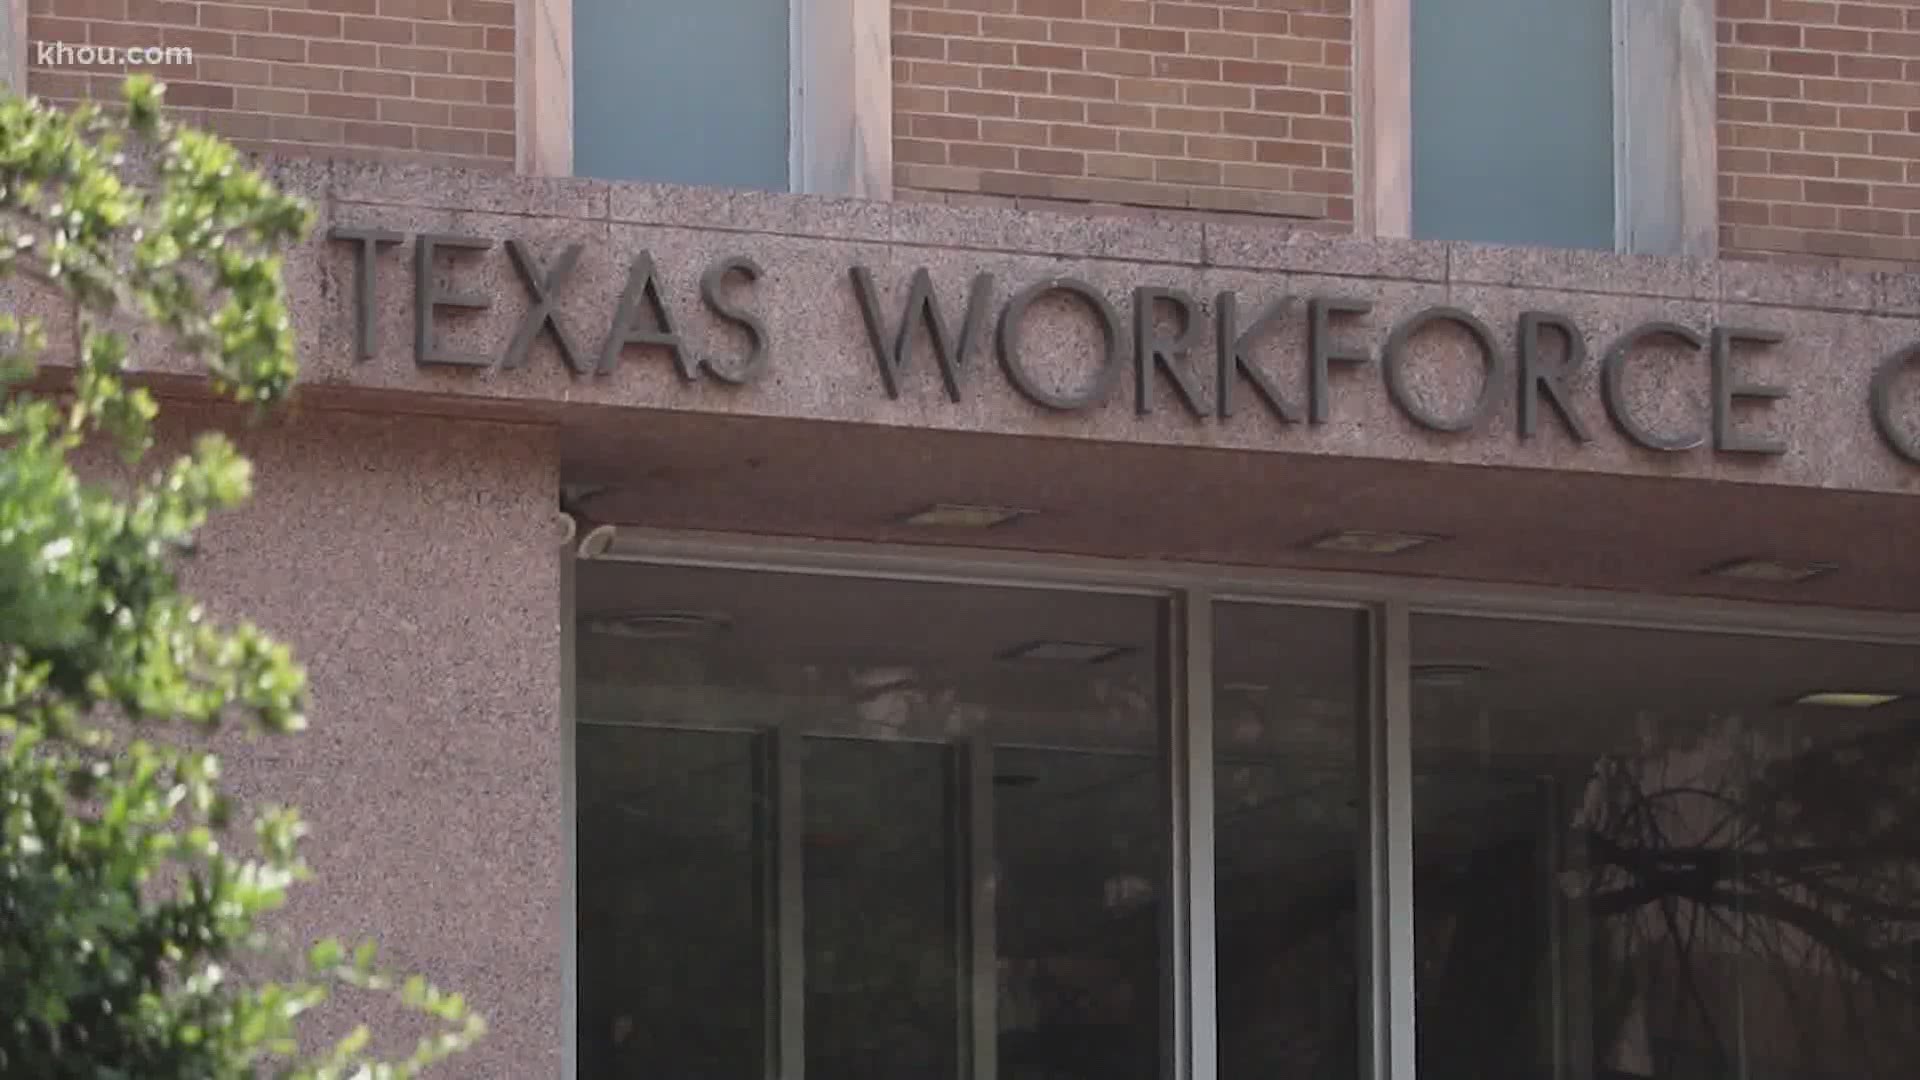 In order to receive unemployment benefits in Texas, you'll soon have to show proof that you're looking for work.